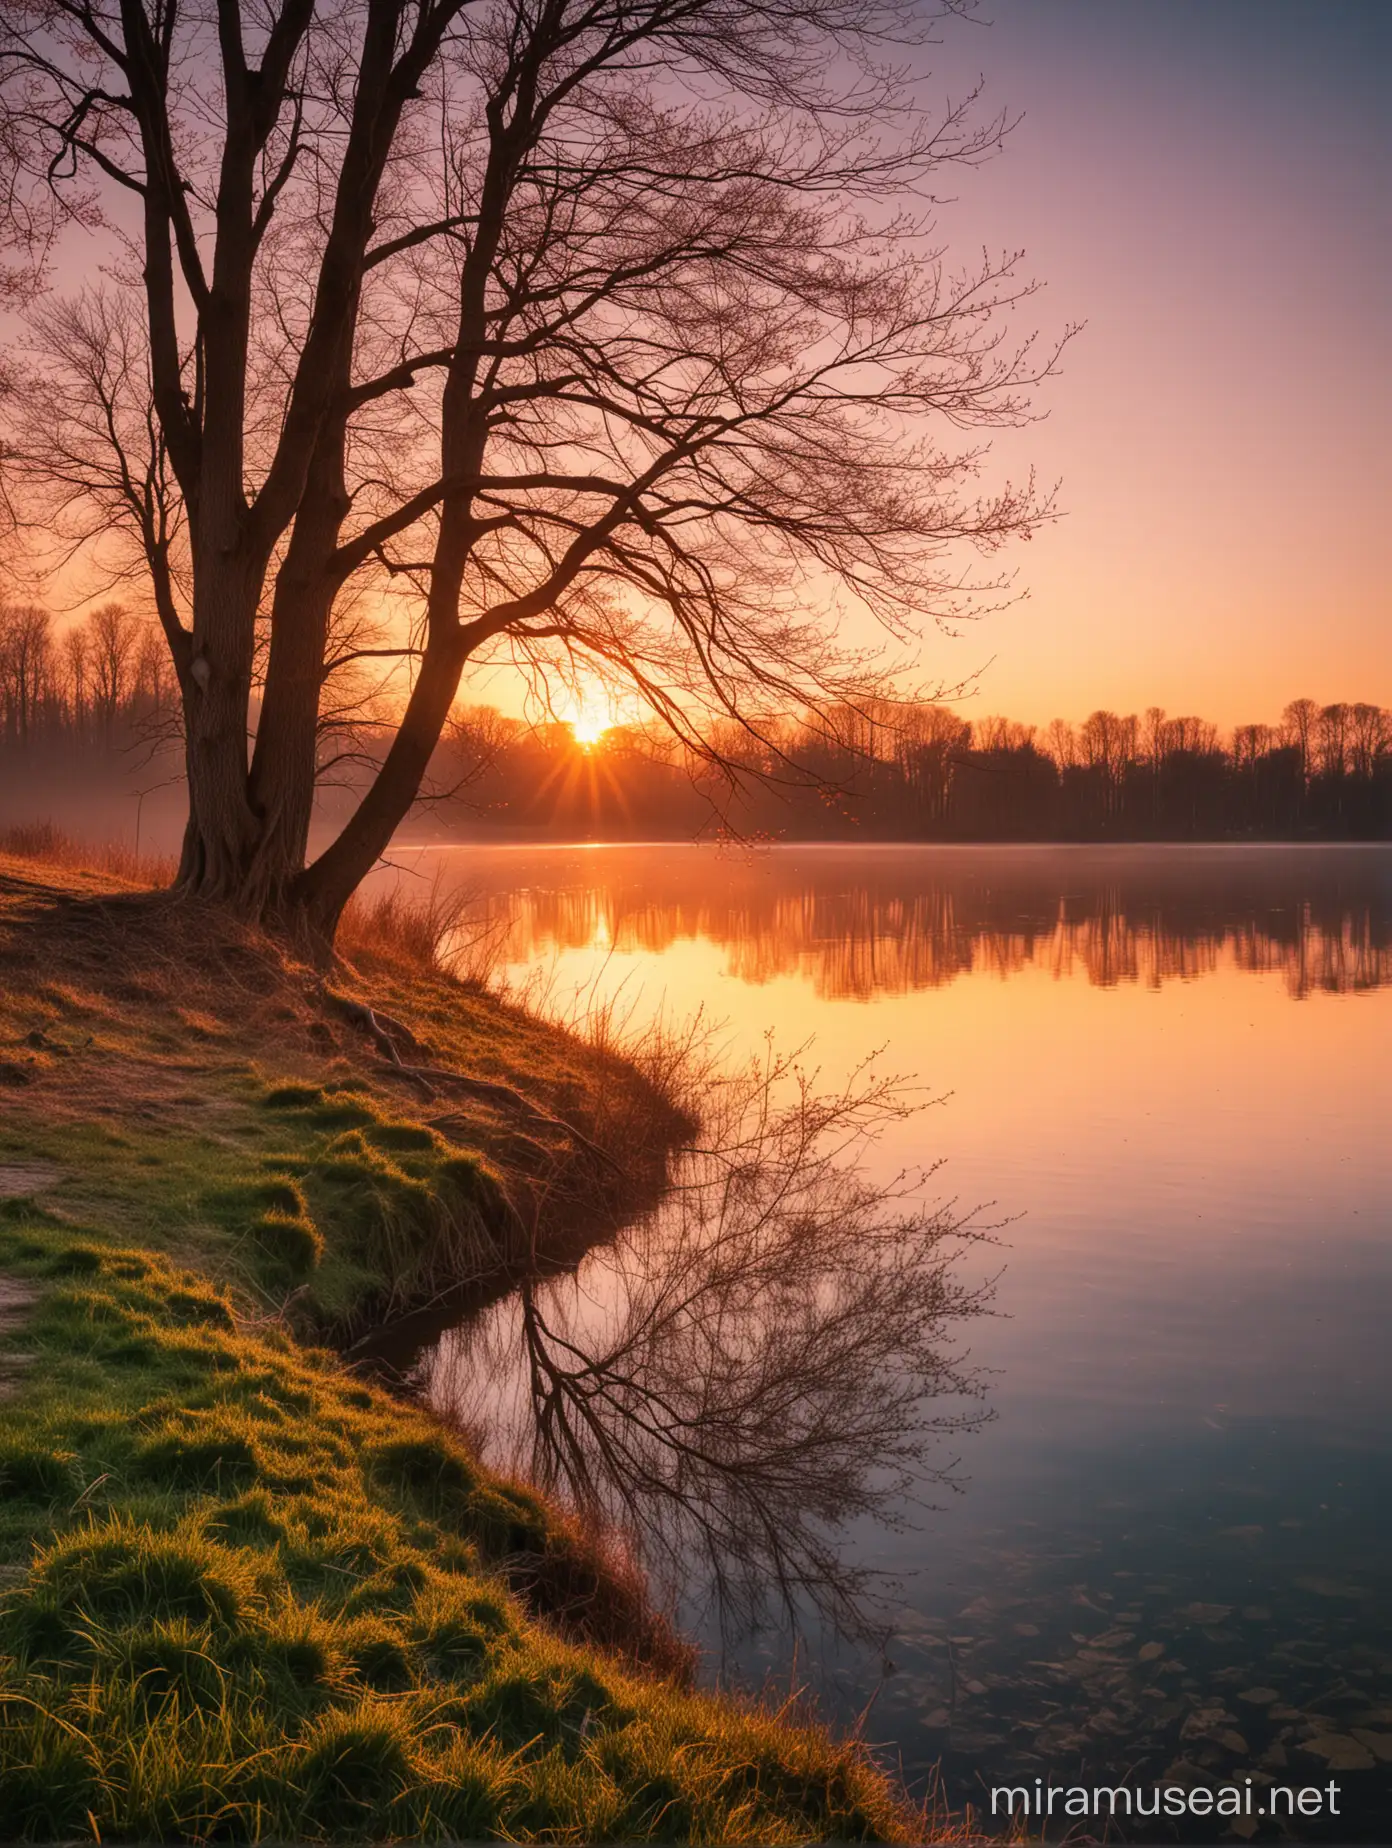 a wonderful photograph from a sunet near a lake in spring, serne feelings, nostalgic vibes, wonderful colors